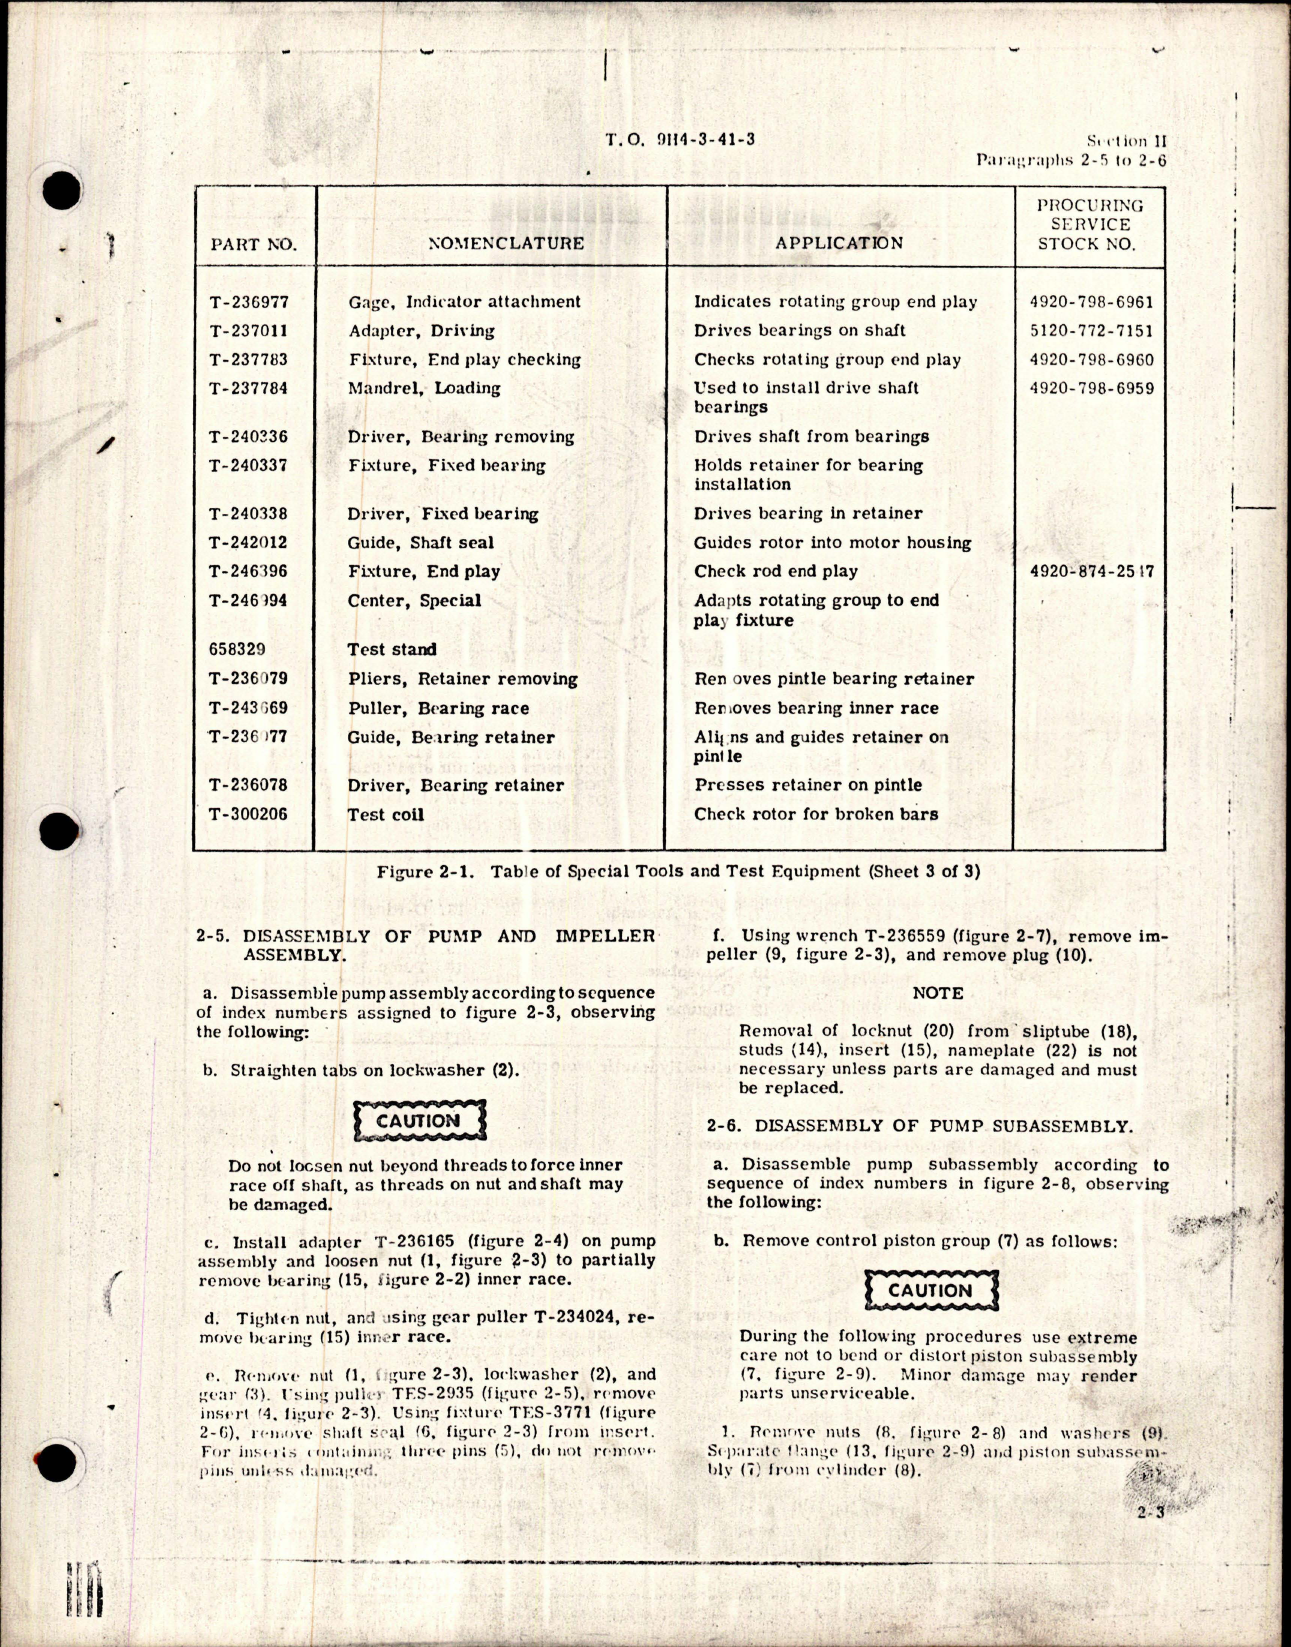 Sample page 9 from AirCorps Library document: Overhaul Instructions for Electrically Driven Hydraulic Motorpump - Change No. 3 